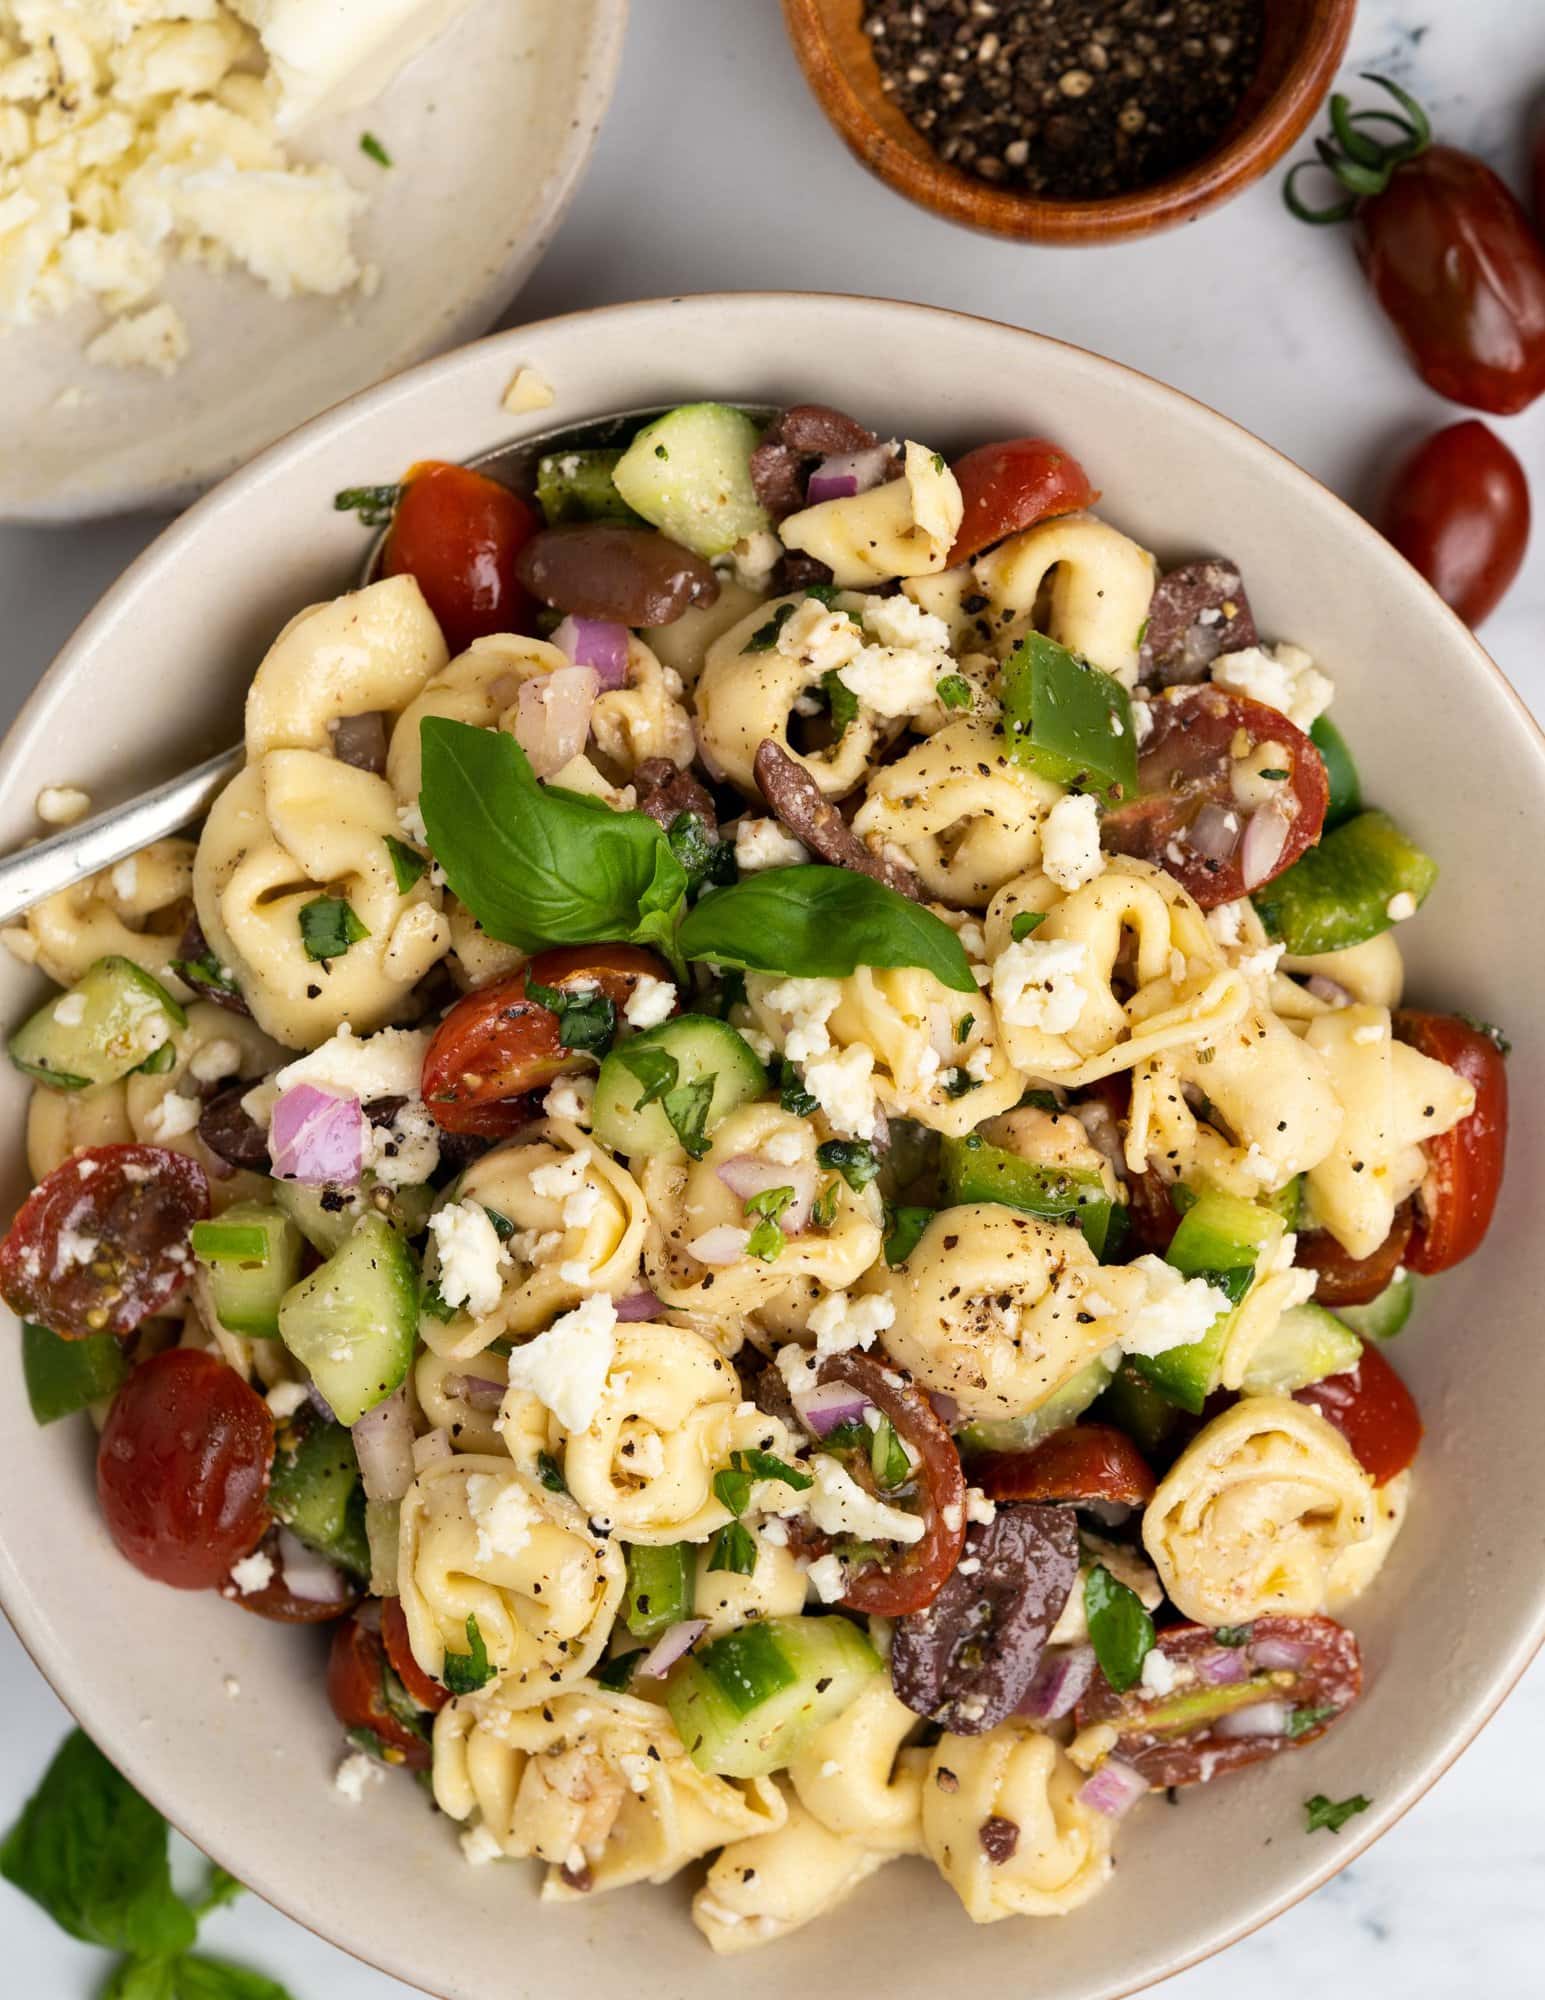 Tortellini pasta salad with greek dressing and feta sprinkled on top.